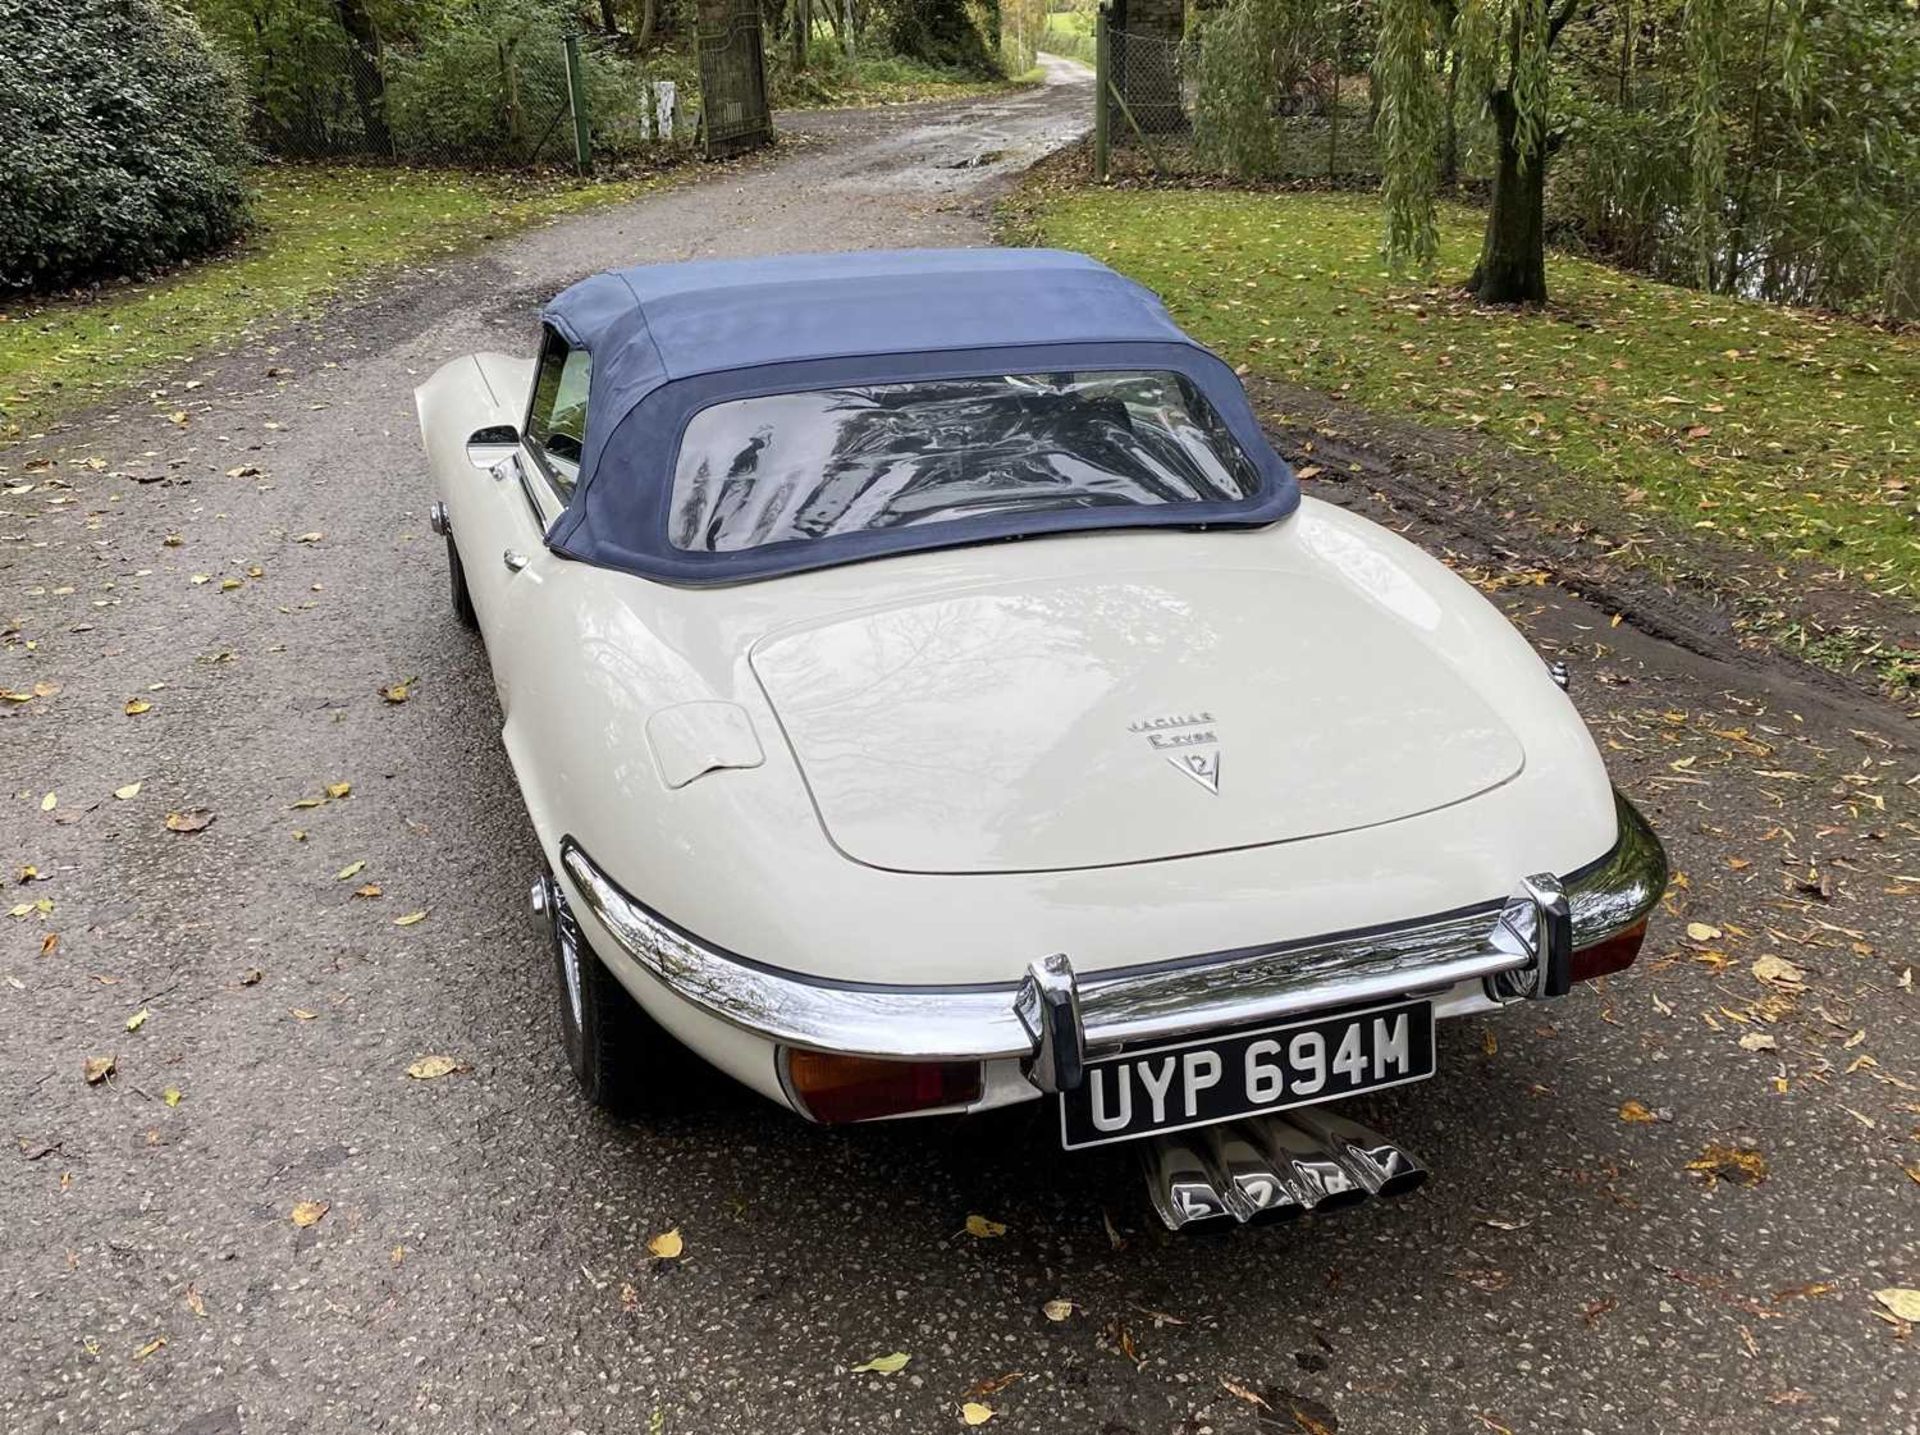 1973 Jaguar E-Type V12 Roadster As seen in Only Fools and Horses - Image 41 of 105